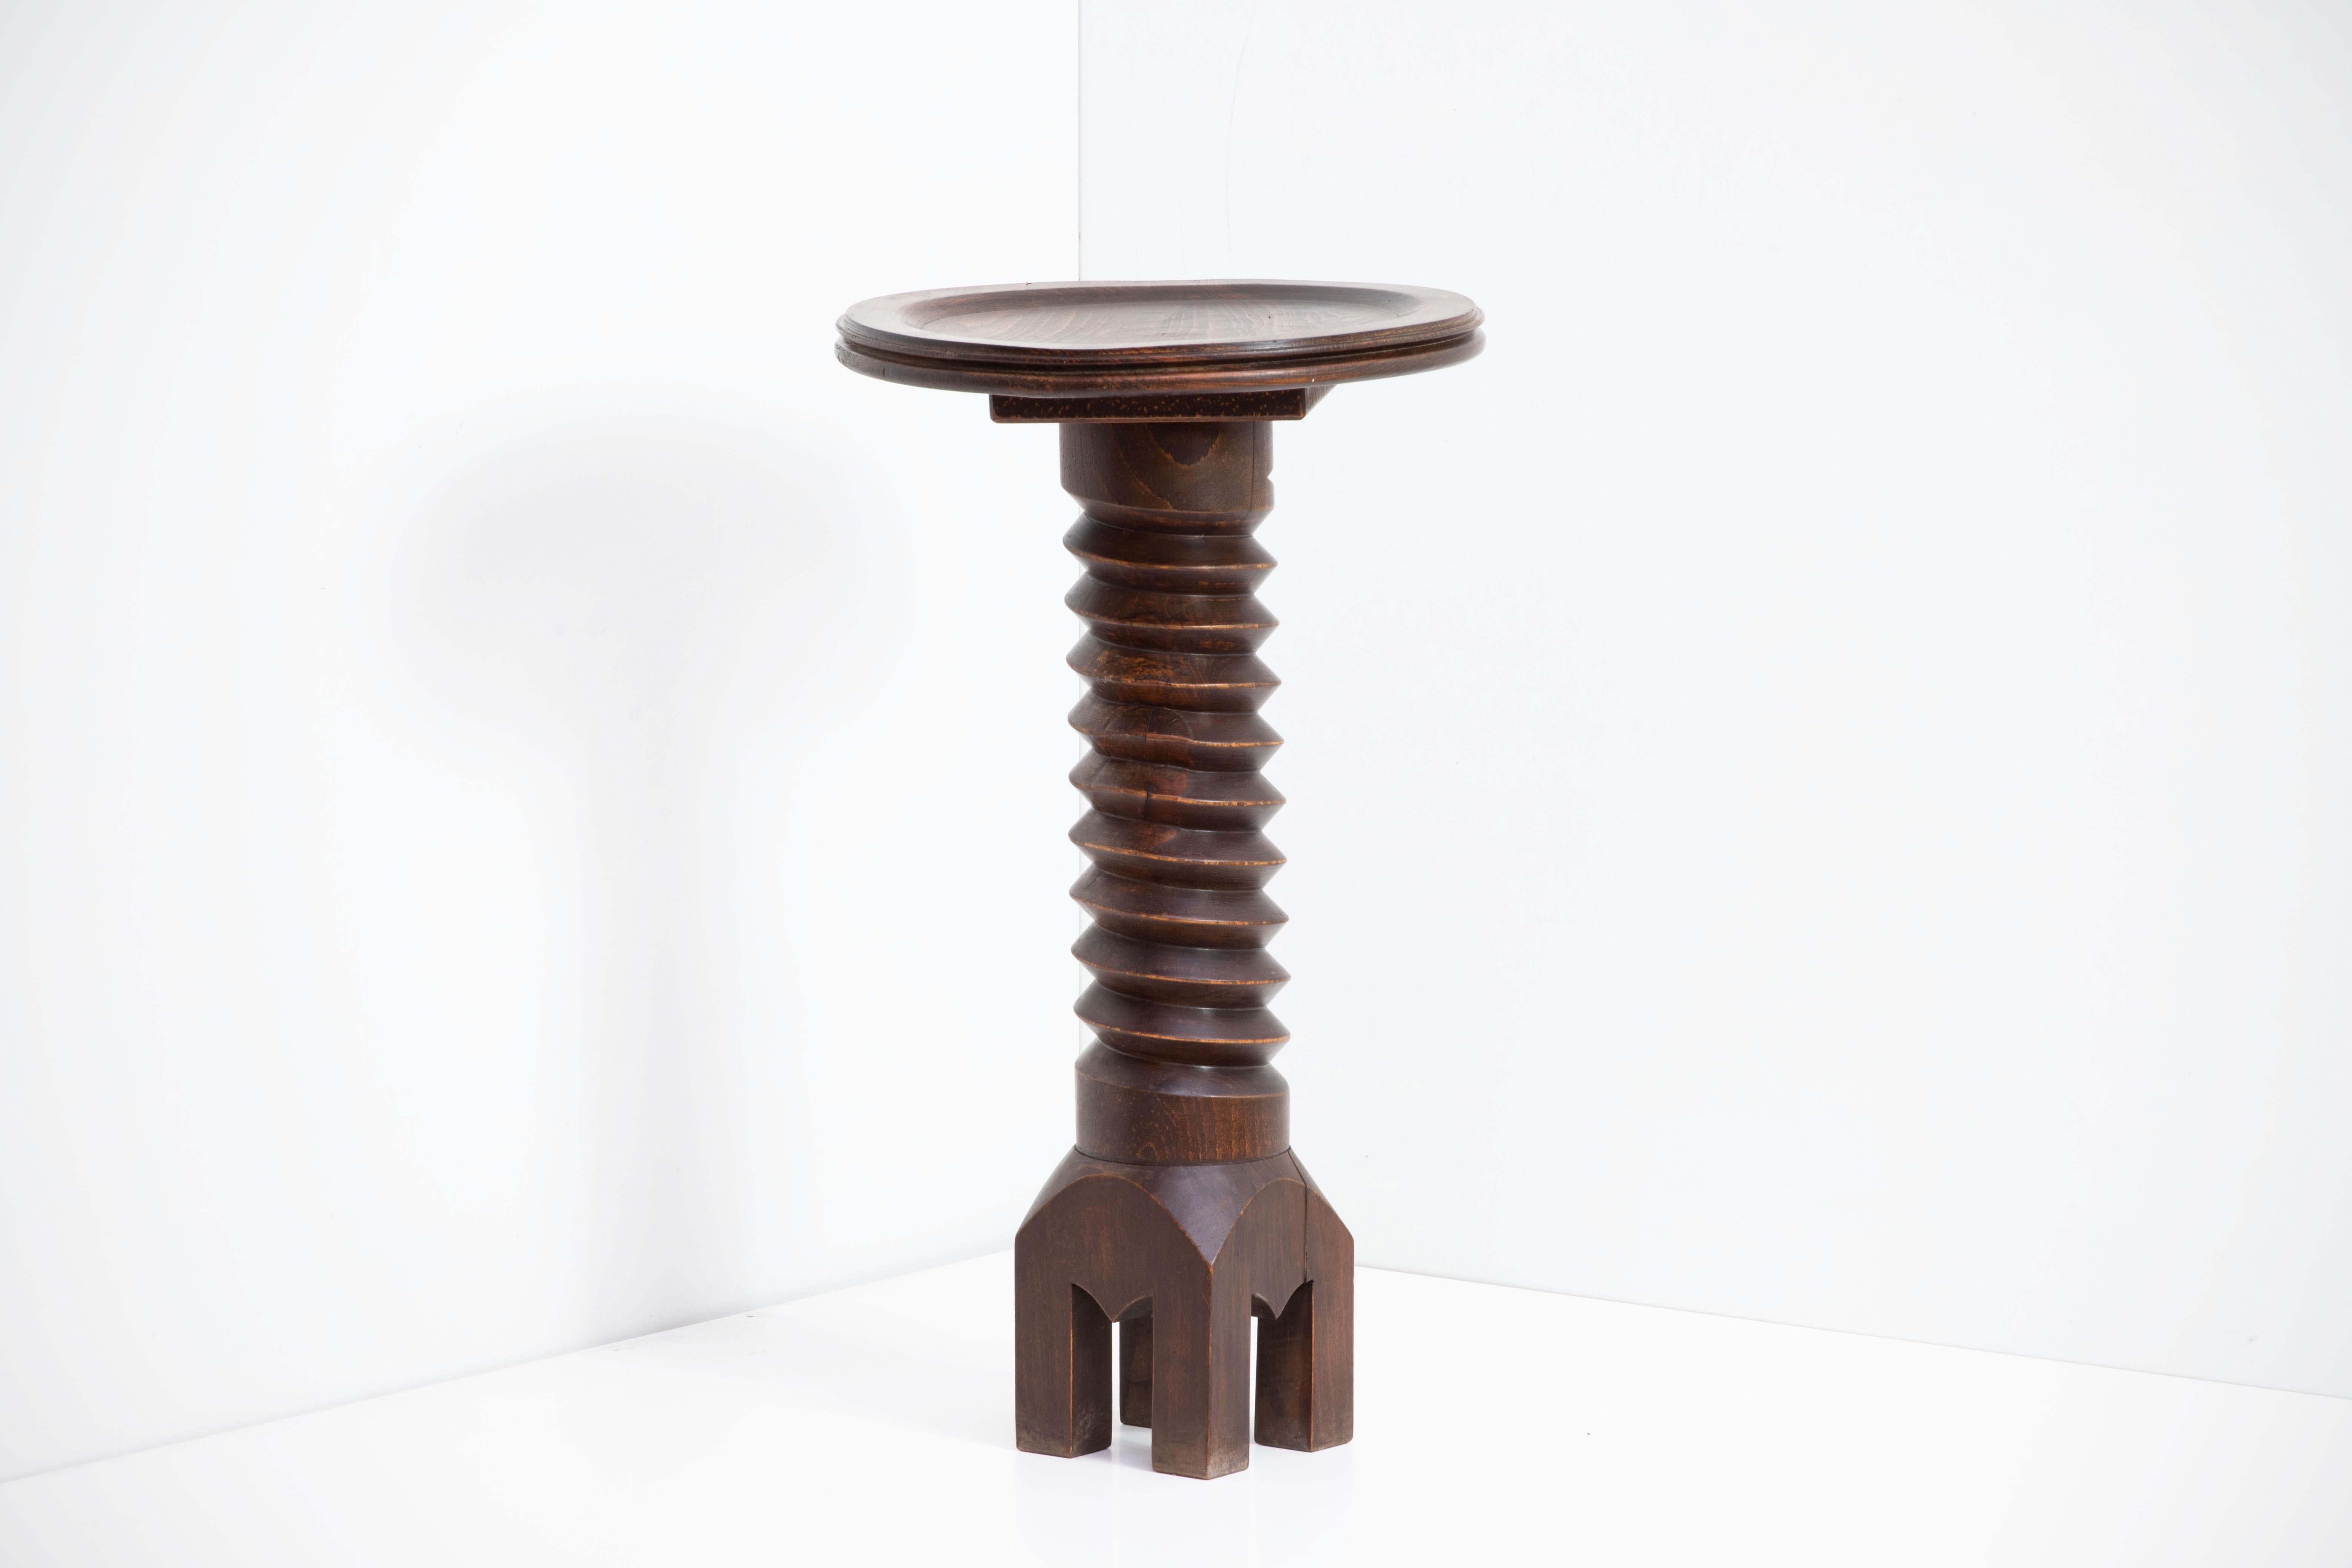 Beautiful carved wood table in the style of Charles Dudouyt, made in France, 1940's. Dark wood finish with circular top and four leg base.
A major figure in early 20th-century French design, Charles Dudouyt moved France’s design aesthetic from an